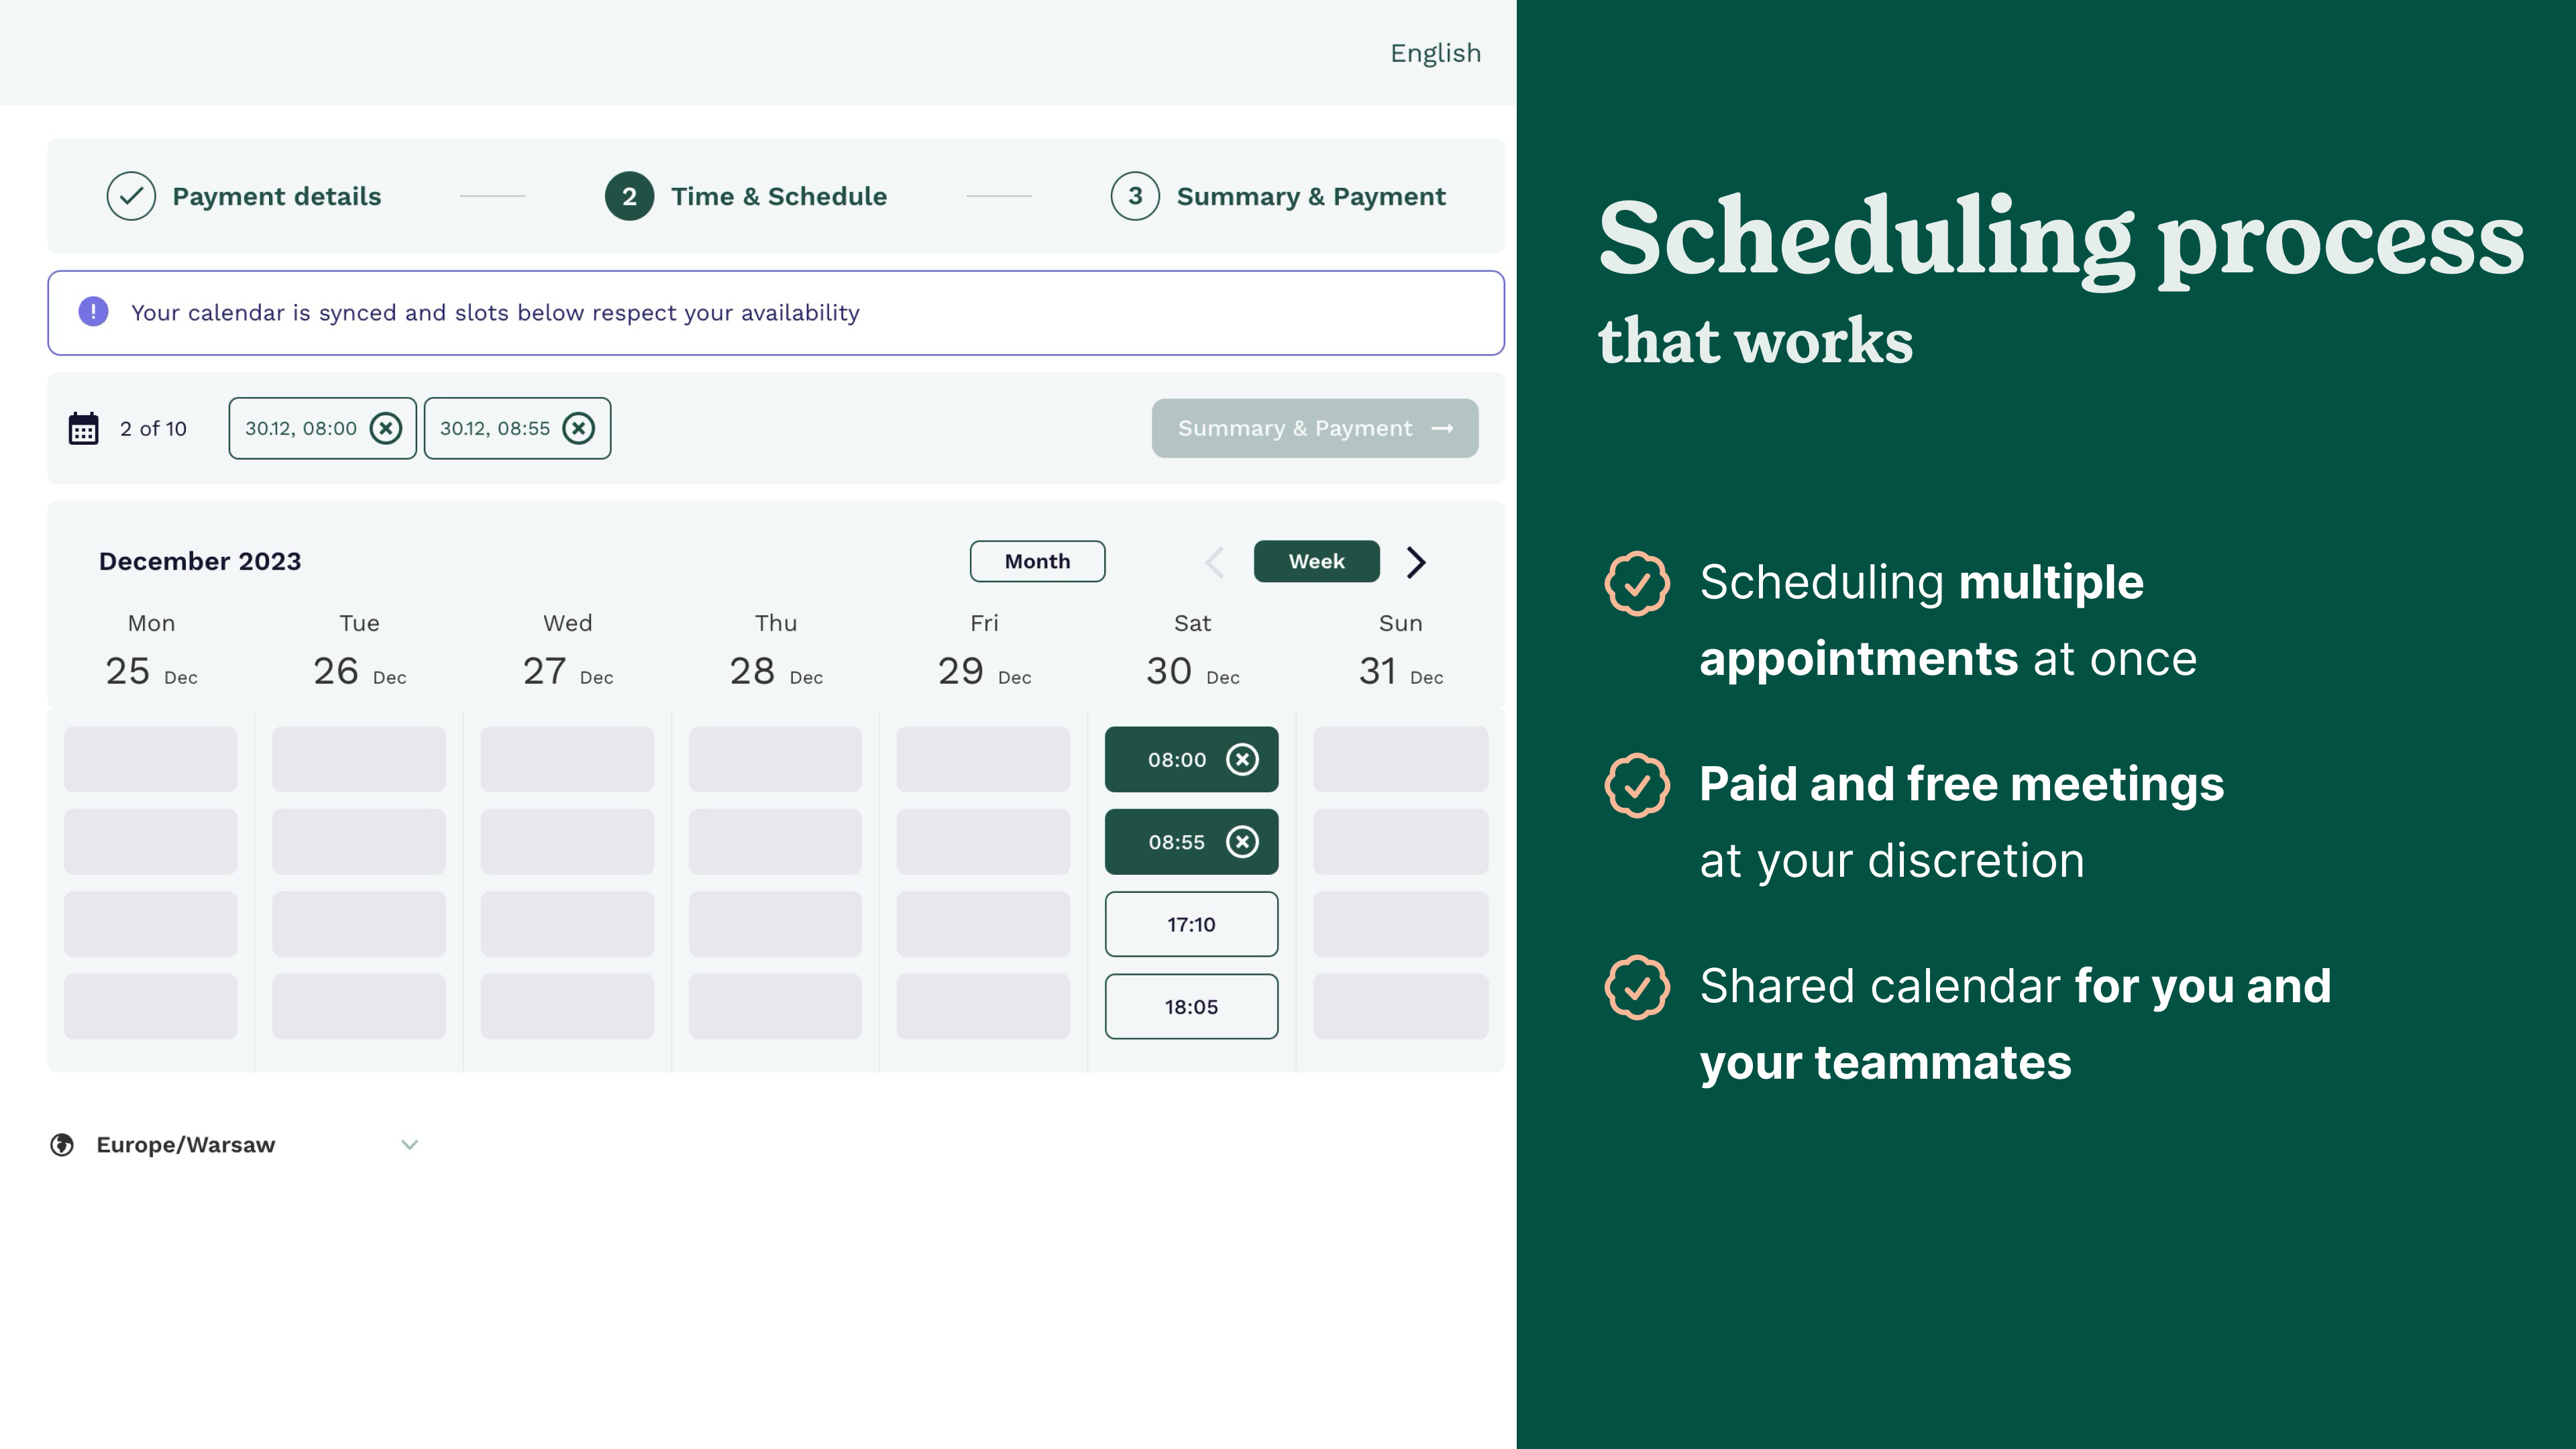 A meeting scheduling process that works